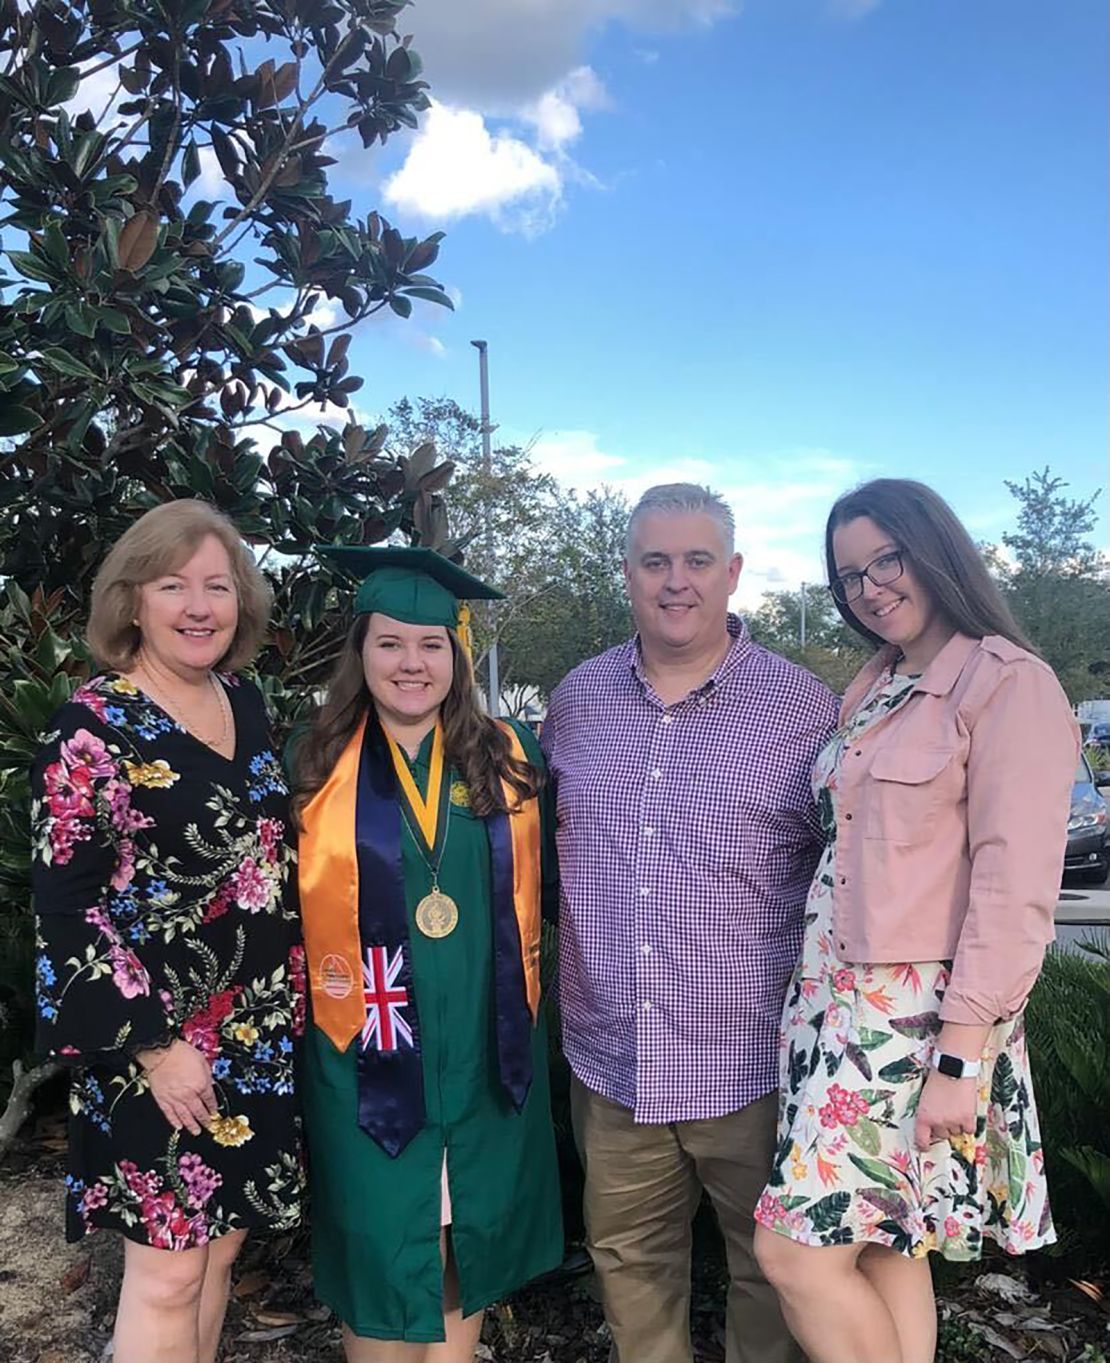 Erin Crosbie stands with her parents and sister after her graduation with a bachelor's in nursing from the University of South Florida. "I got what I though was the right degree, the right career path. ... I totally did not know that my whole life was about to get turned upside down," she says.